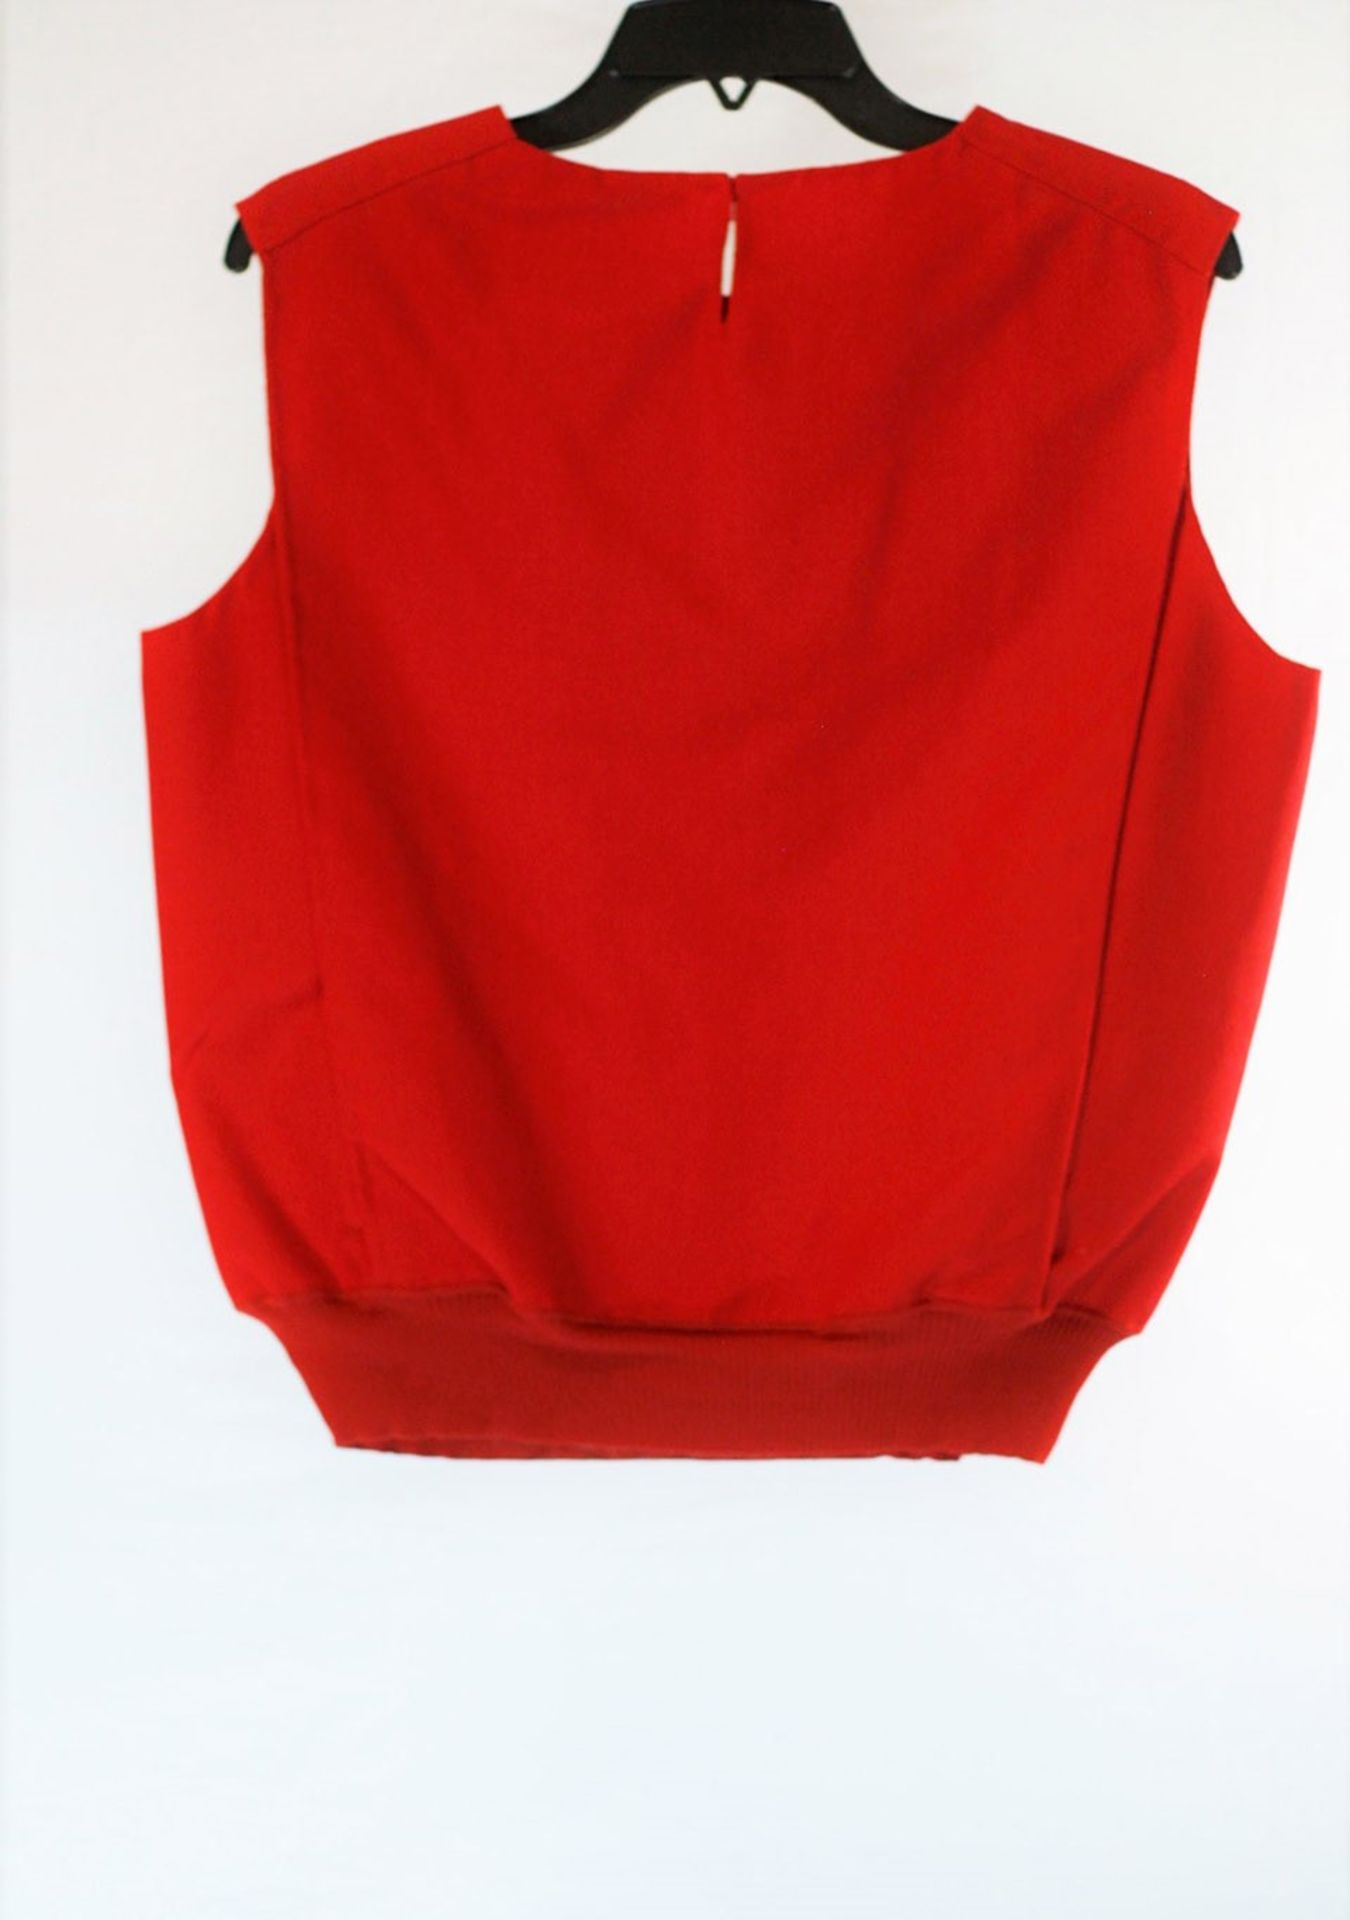 1 x Agnona Red Vest - Size: 18 - Material: 50% Cotton, 28% Mohair, 18% Silk, 4% Wool. Details 55% - Image 2 of 8